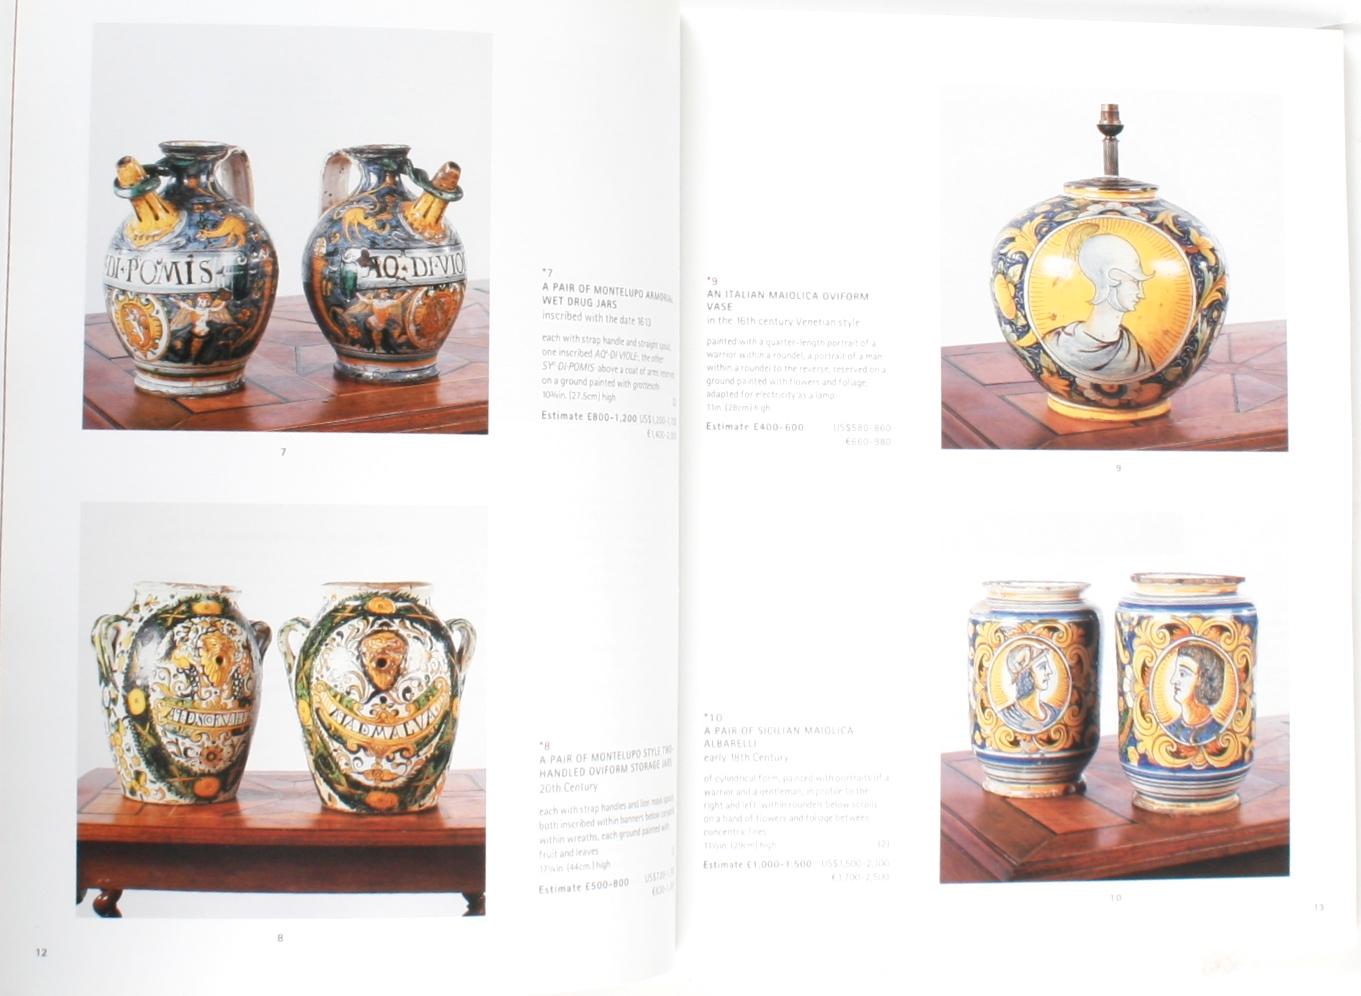 Christie's works of art form Chateau Les Tours de Lenvège Auction catalog 4/2002. Softcover auction catalogue with results. Pottery, furniture and European works of art.
NPT Books a division of N.P. Trent Antiques has a large collection of used and